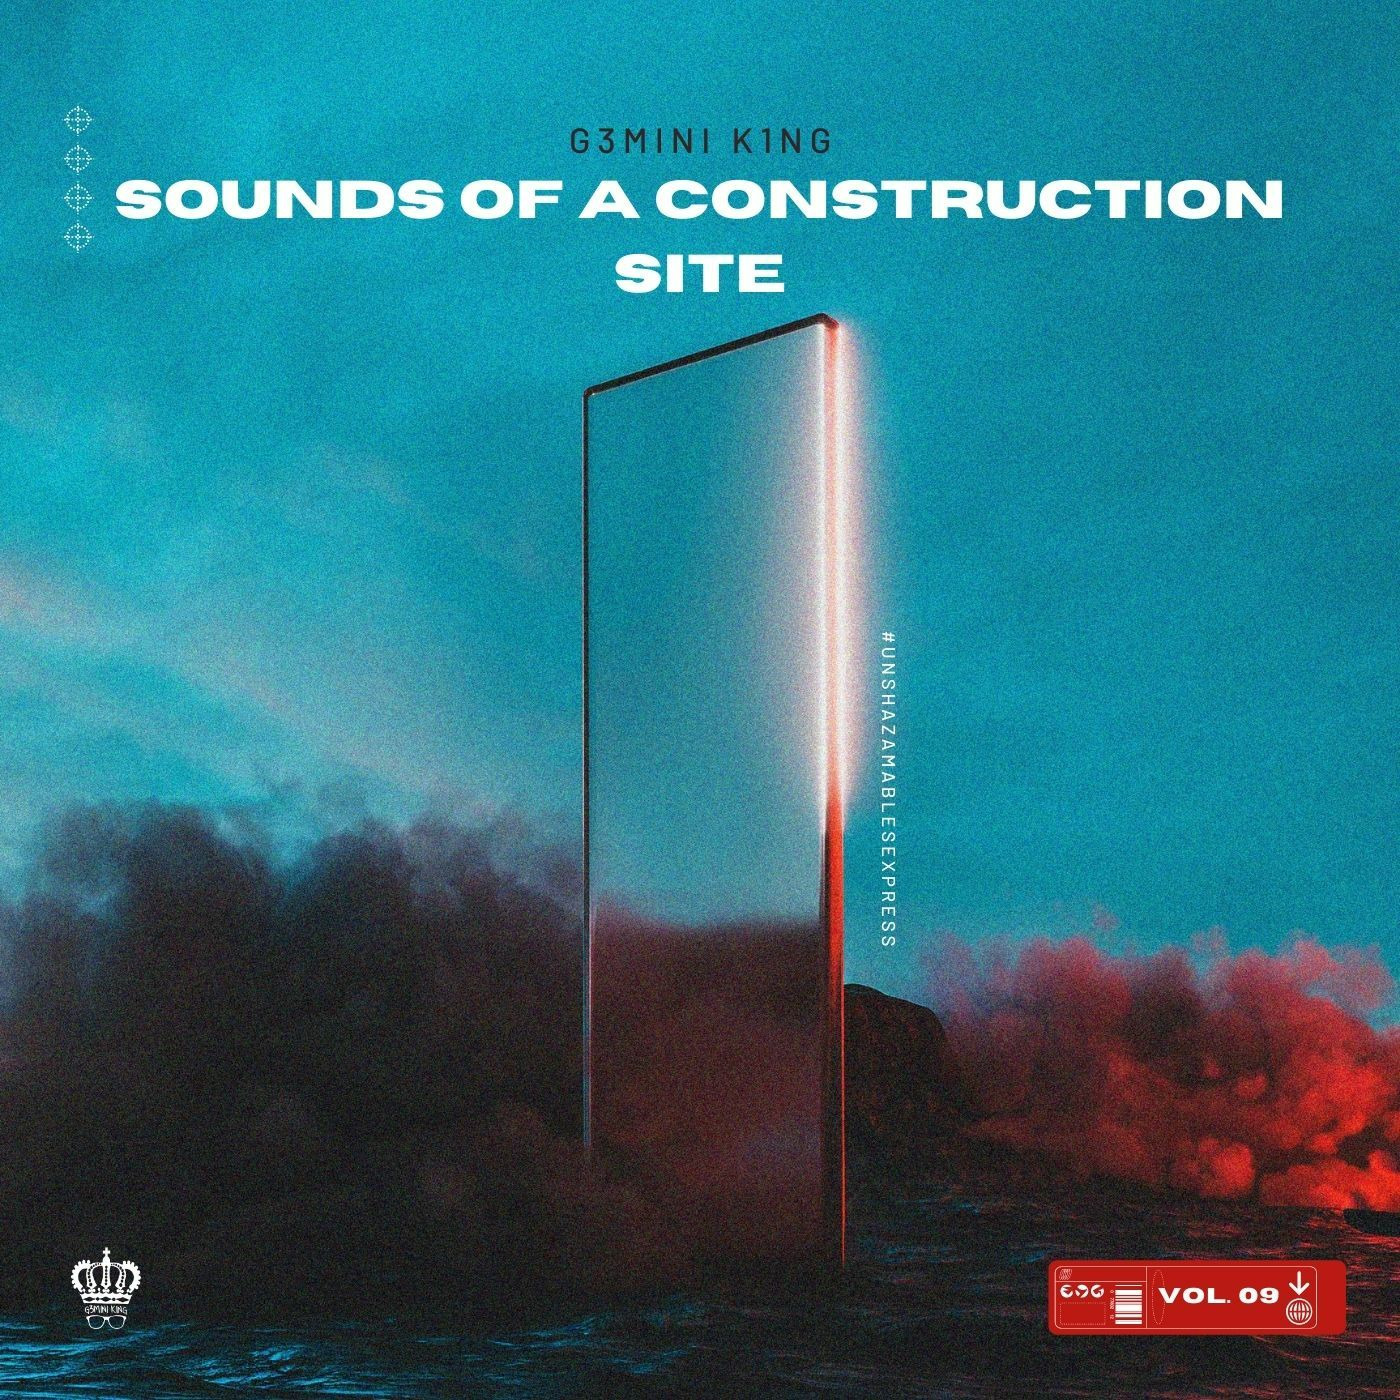 Sounds Of A Construction Site™ Vol. 09 (Mixed by G3MINI K1NG)